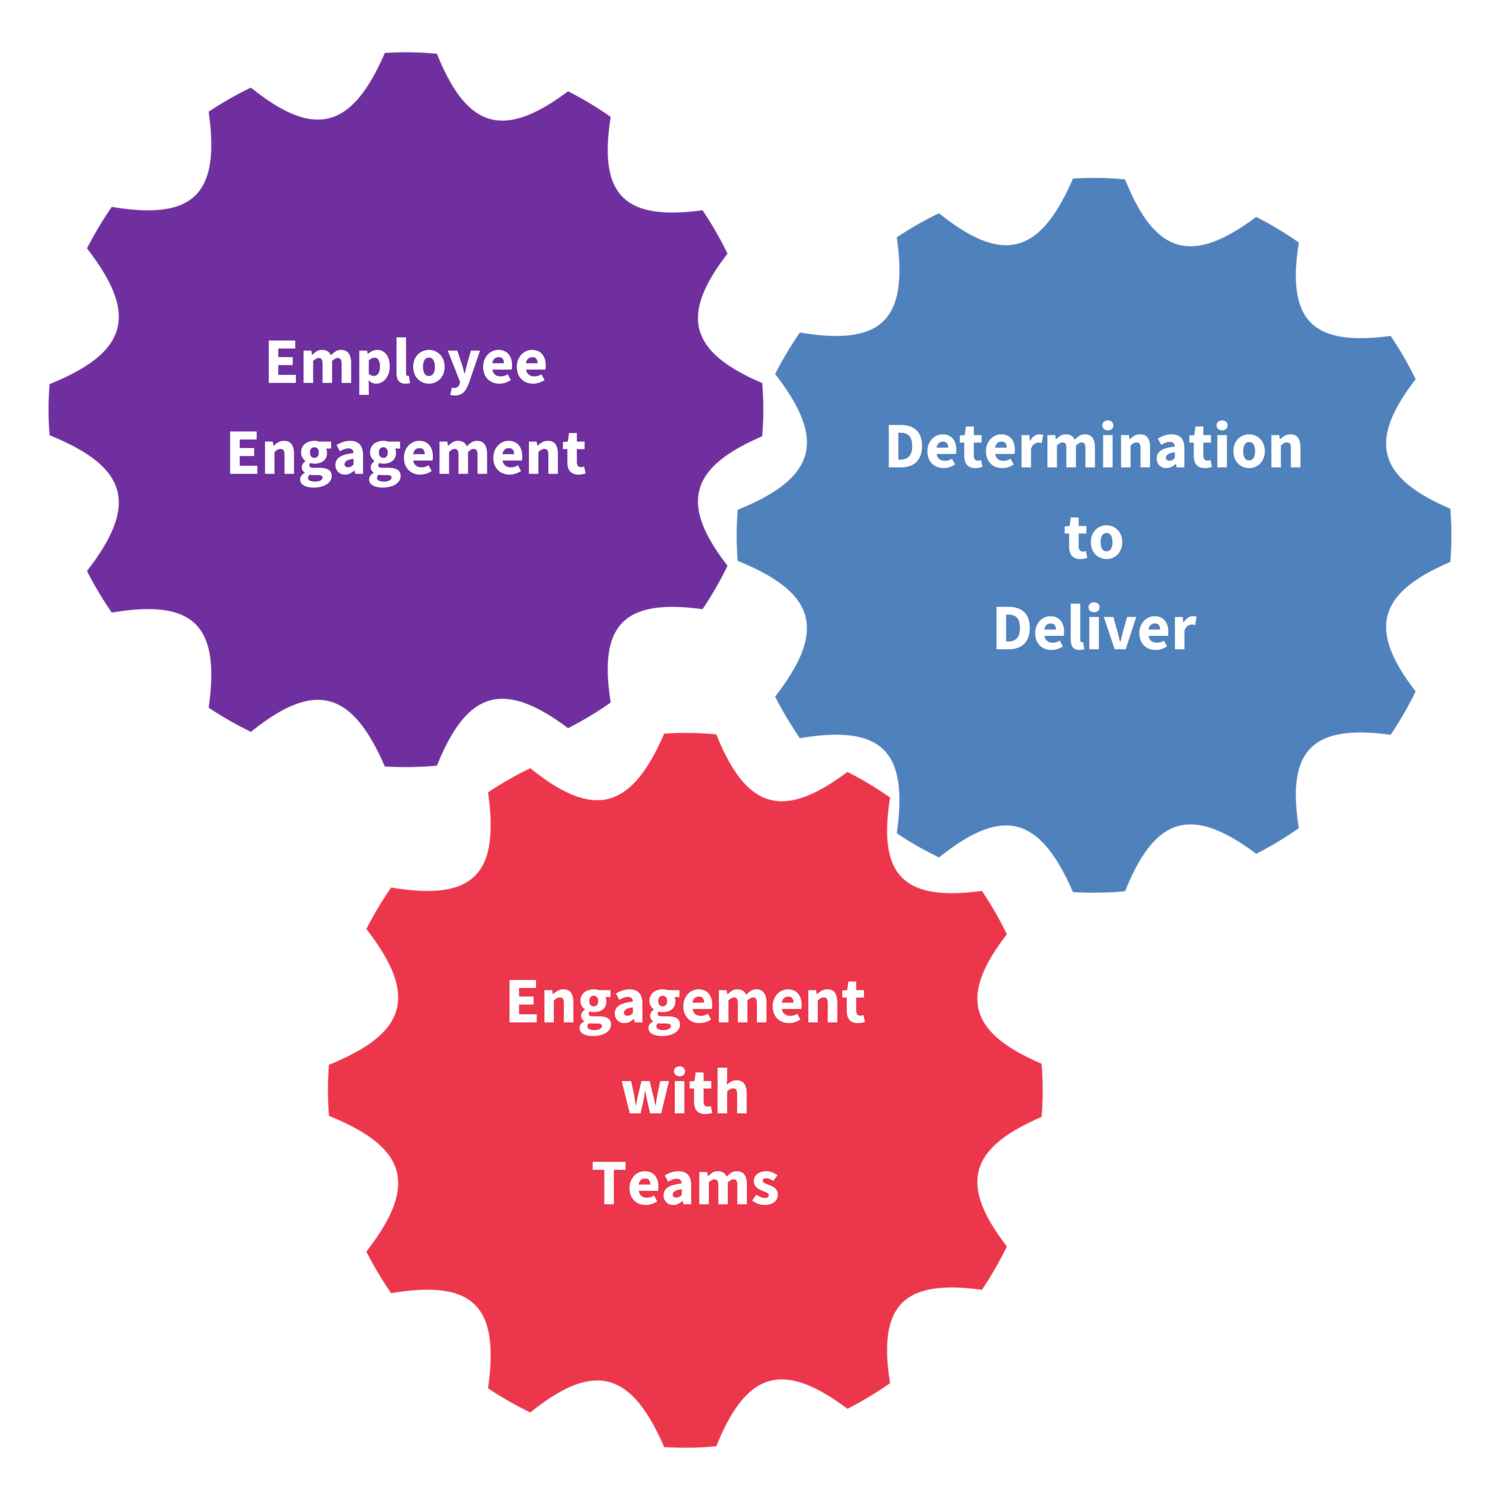 Leadership Competencies; Employee Engagement, Determination to Deliver and Engagement with Teams